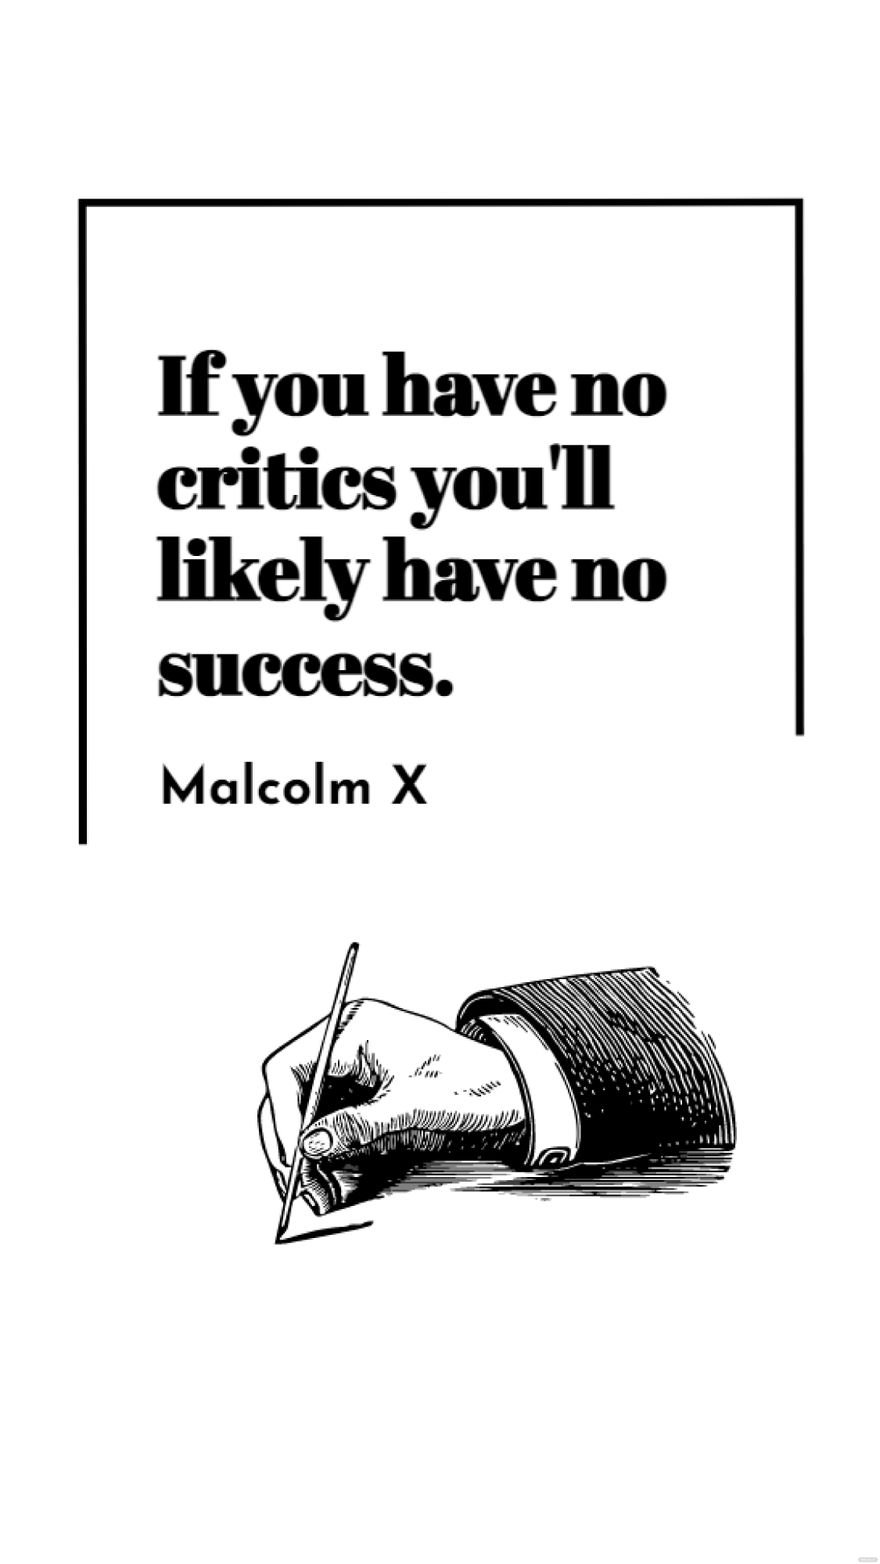 Malcolm X - If you have no critics you'll likely have no success.